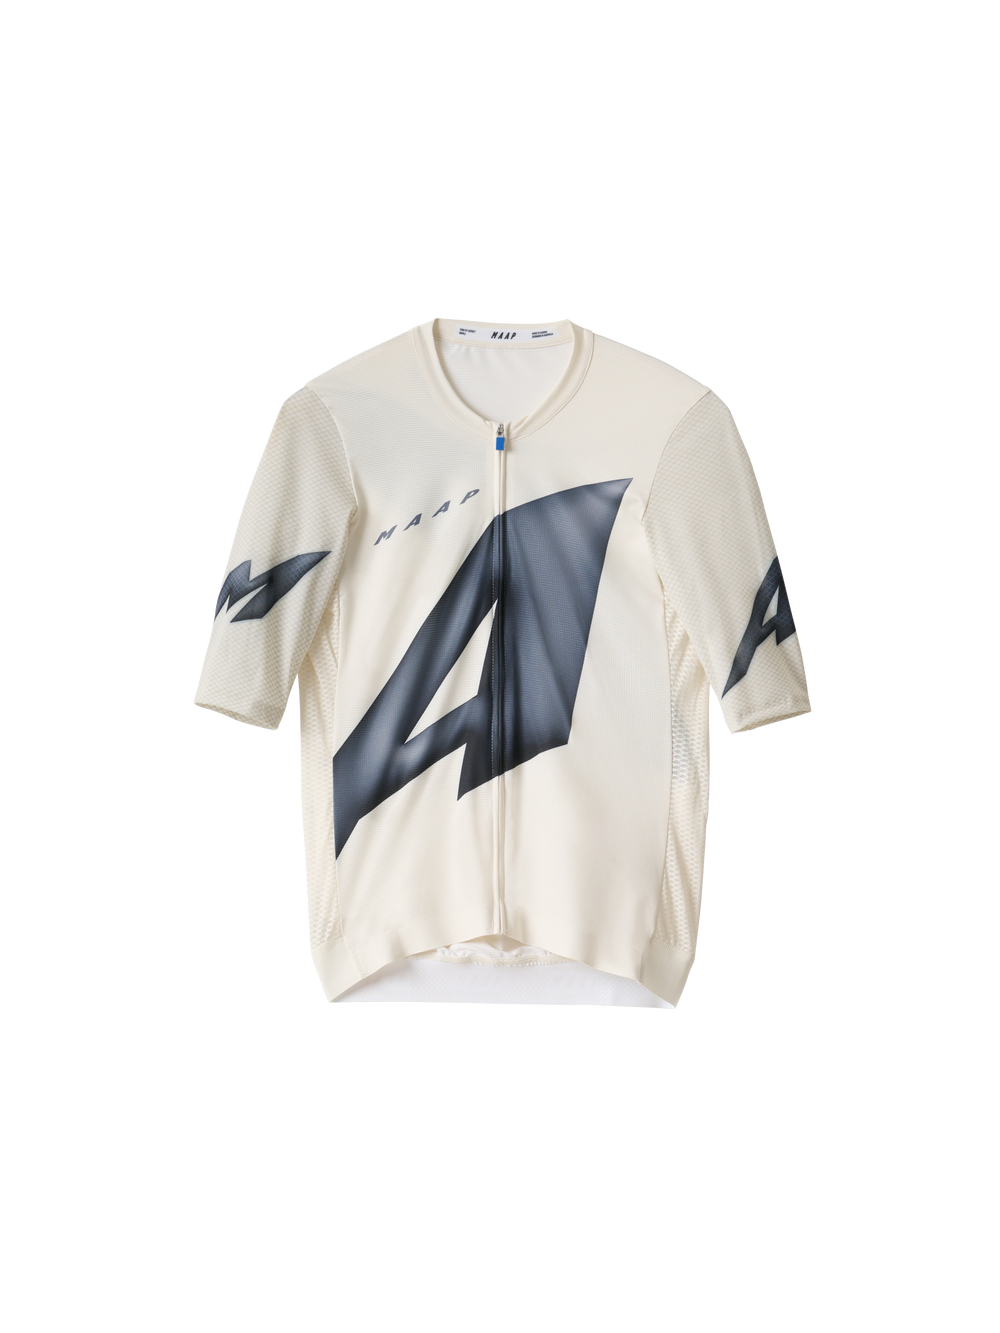 Product Image for Orbit Pro Air Jersey